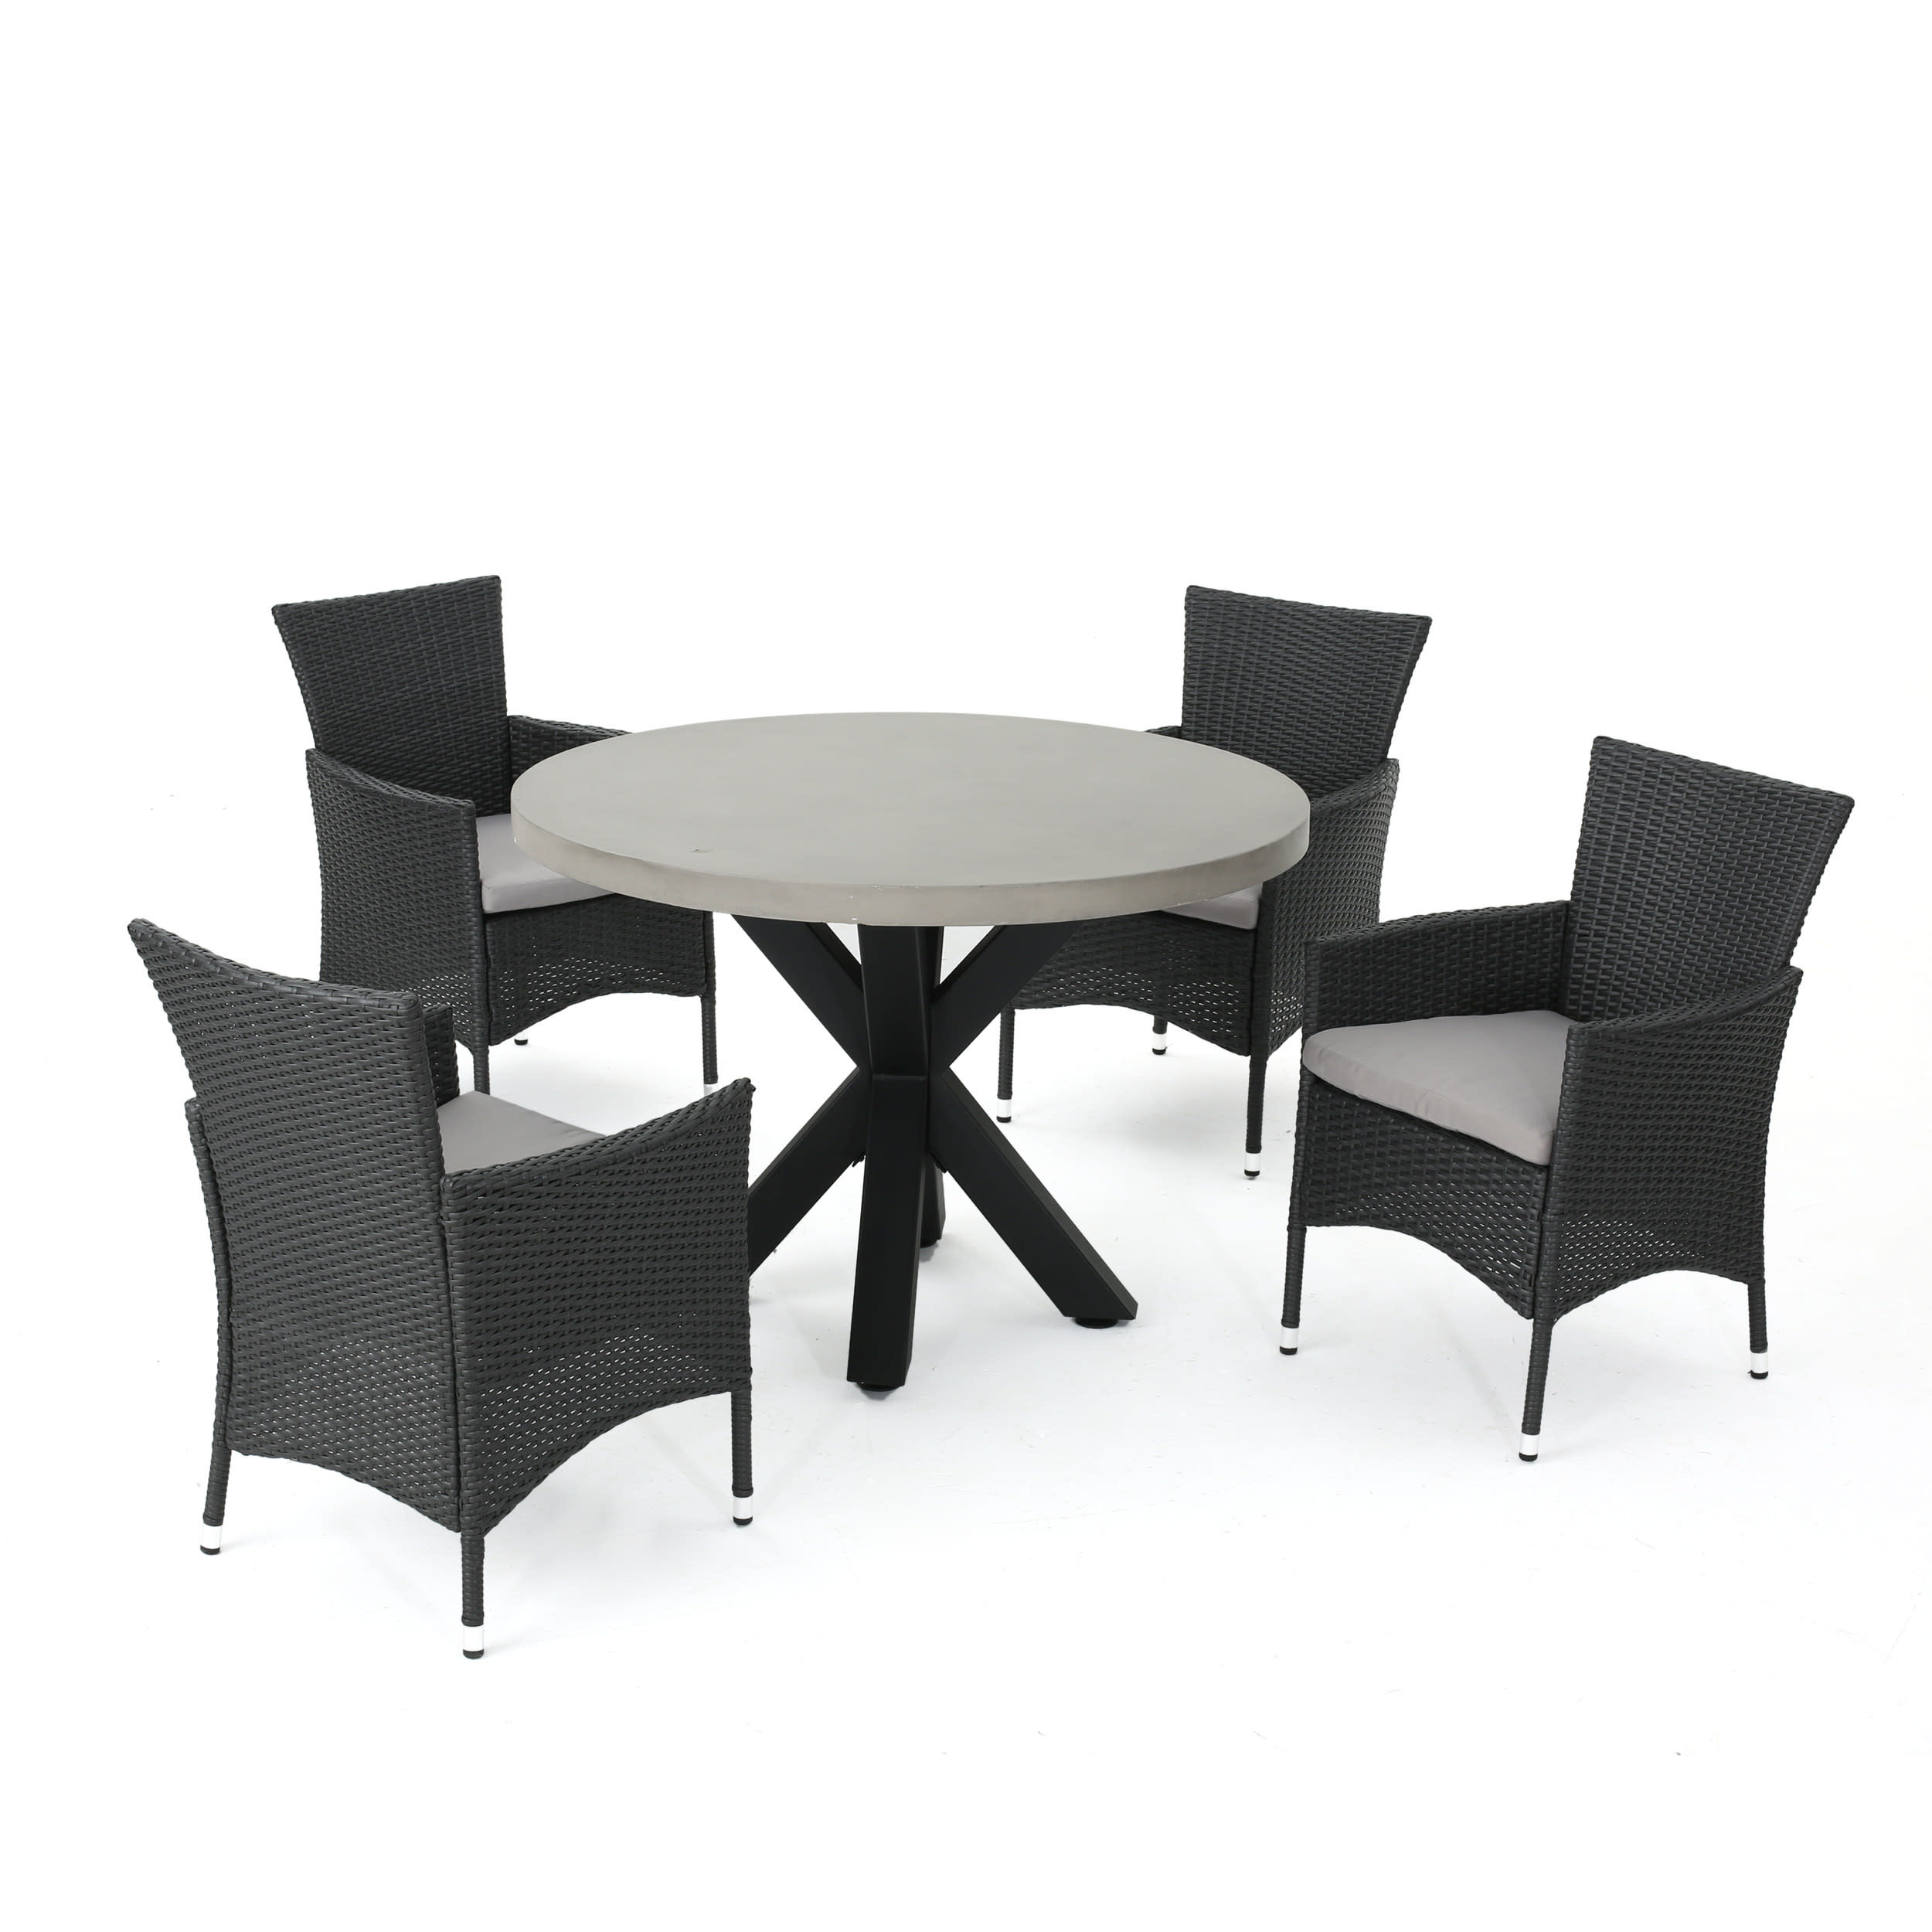 GDF Studio Bellmill Outdoor Wicker and Lightweight Concrete 5 Piece Dining Set with Cushion, Gray, Black, and Light Gray - image 1 of 13